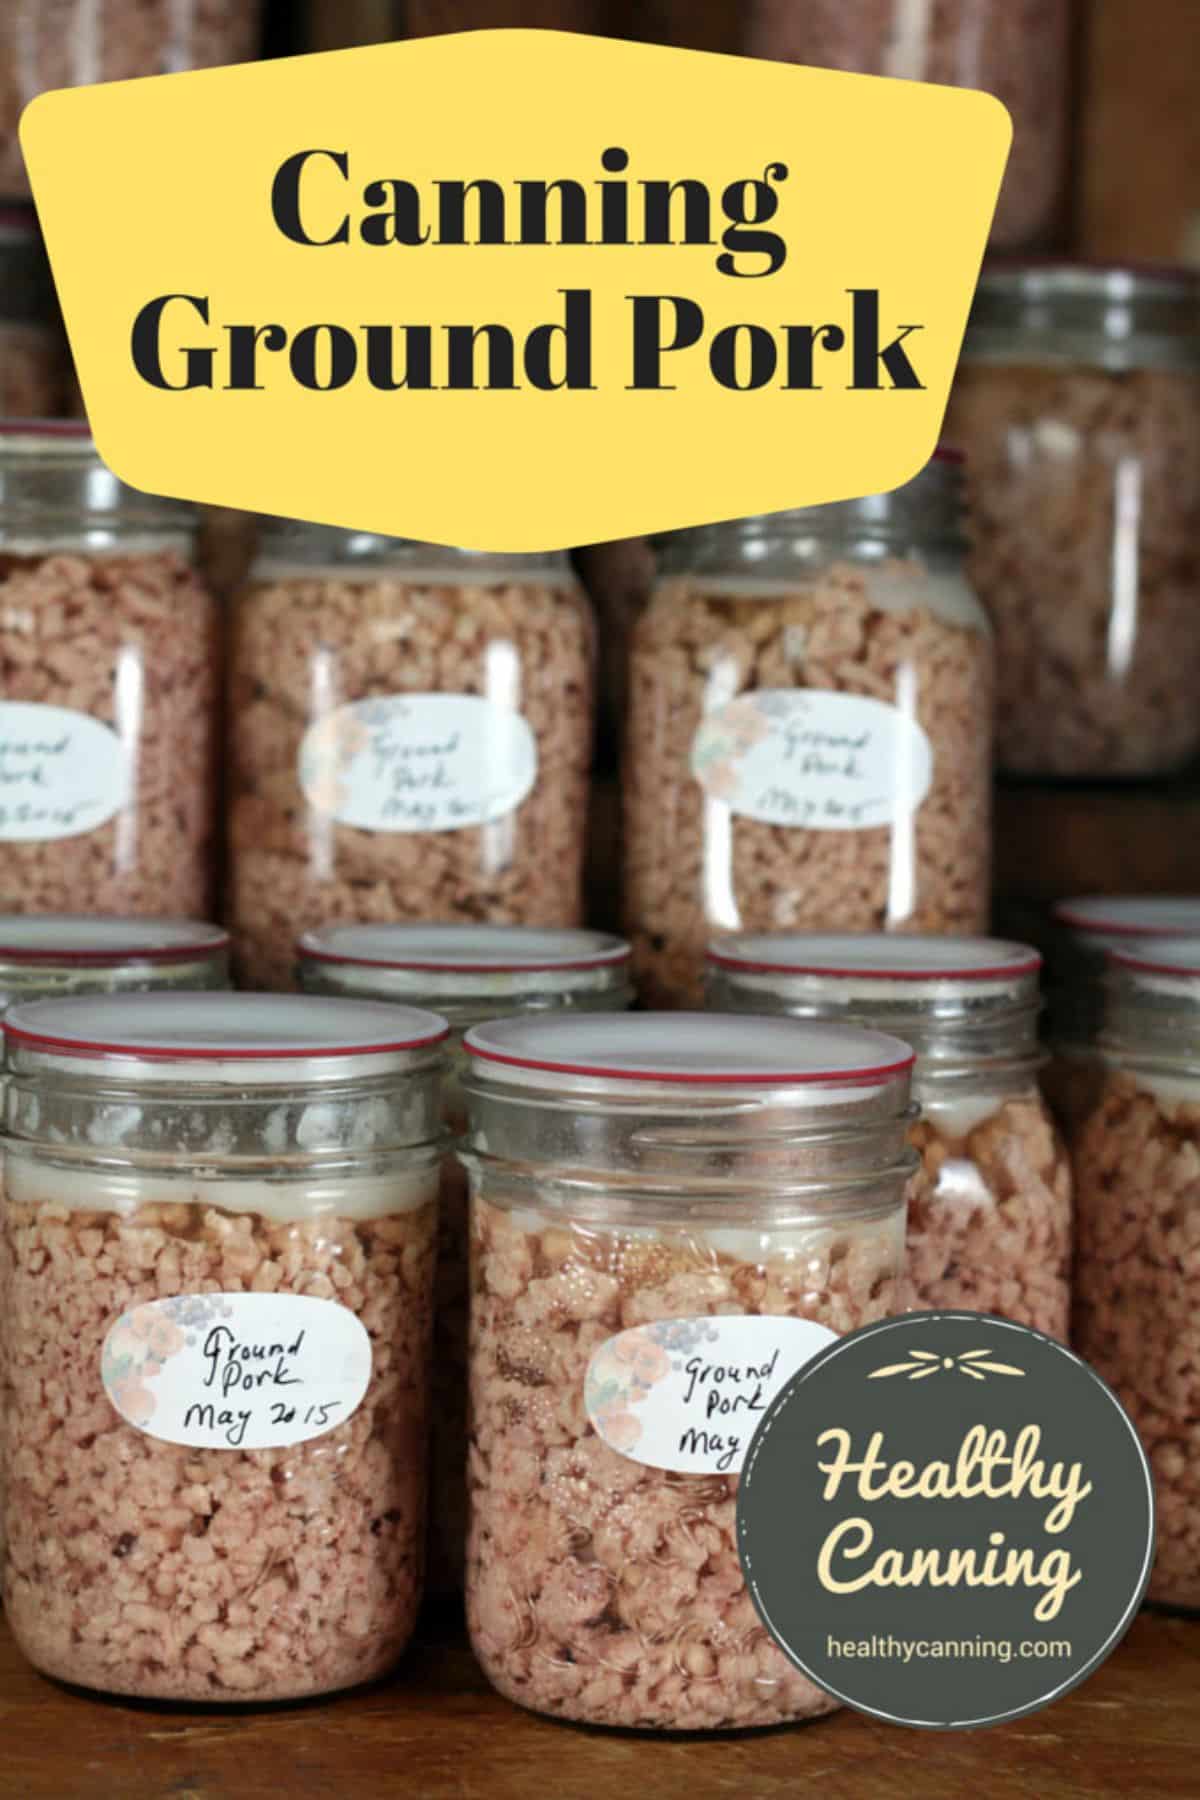 Canned ground pork in glass jars.